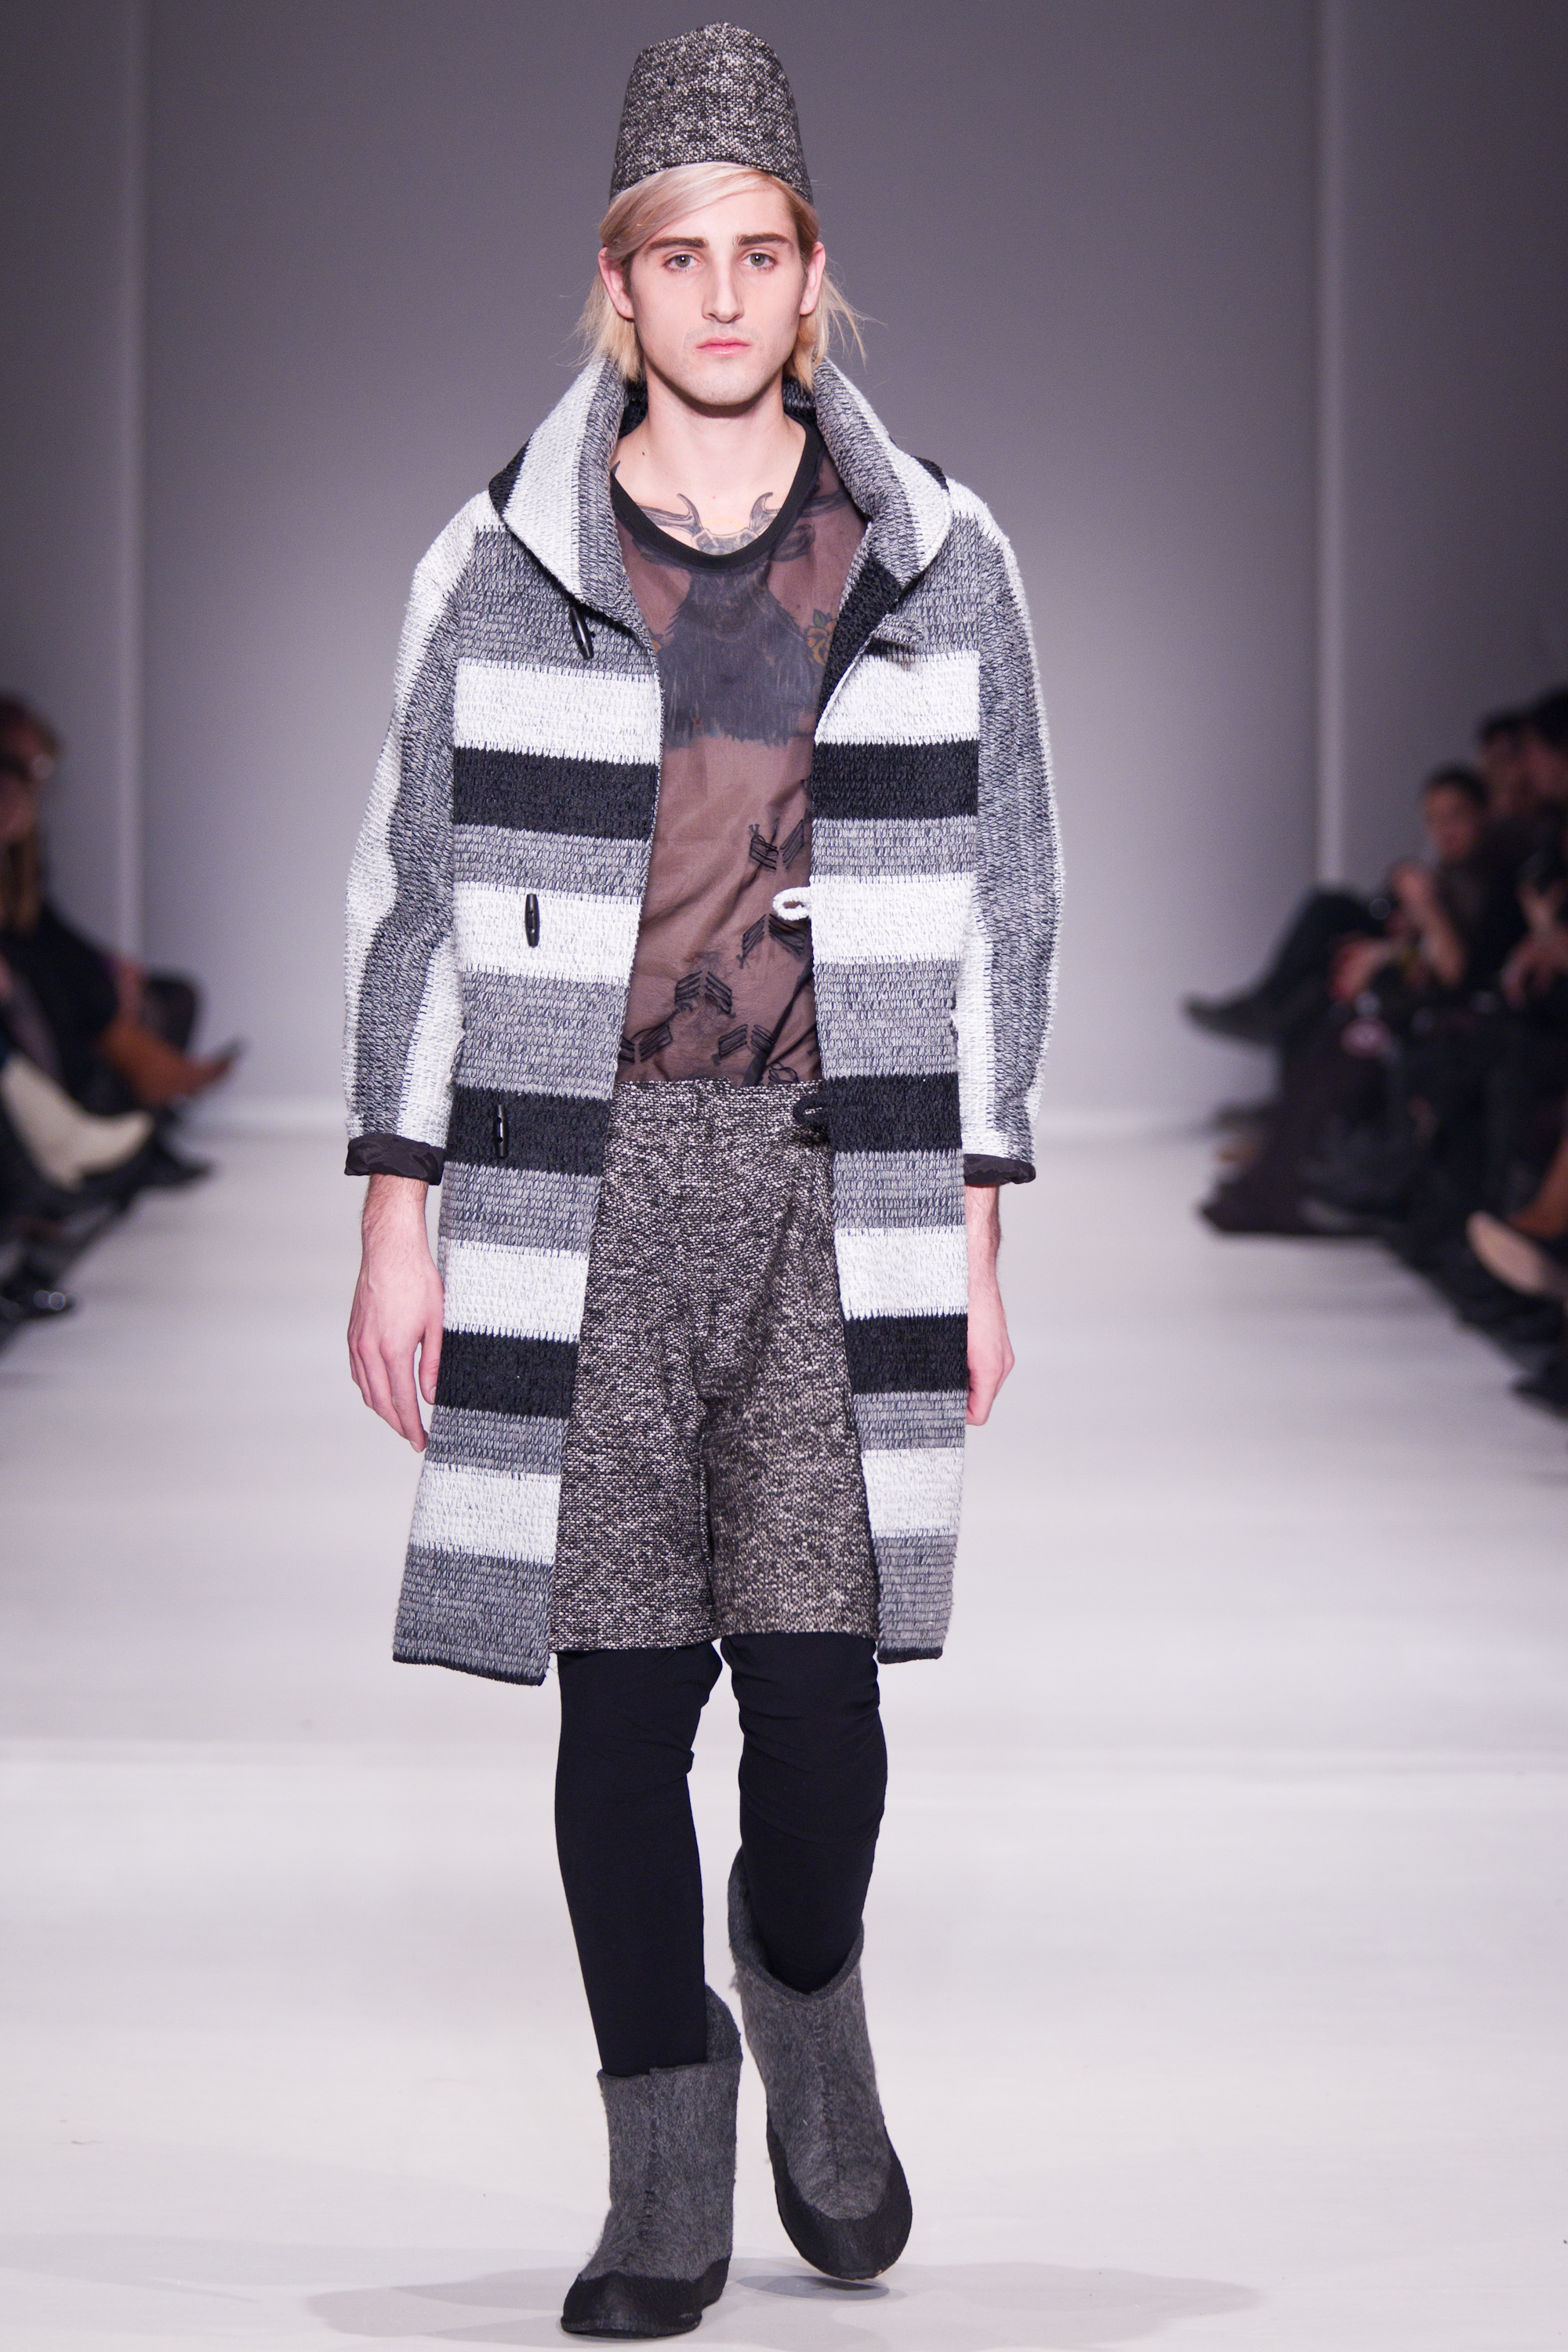 Montreal Fashion Week Day 4 : Trusst present New Talents